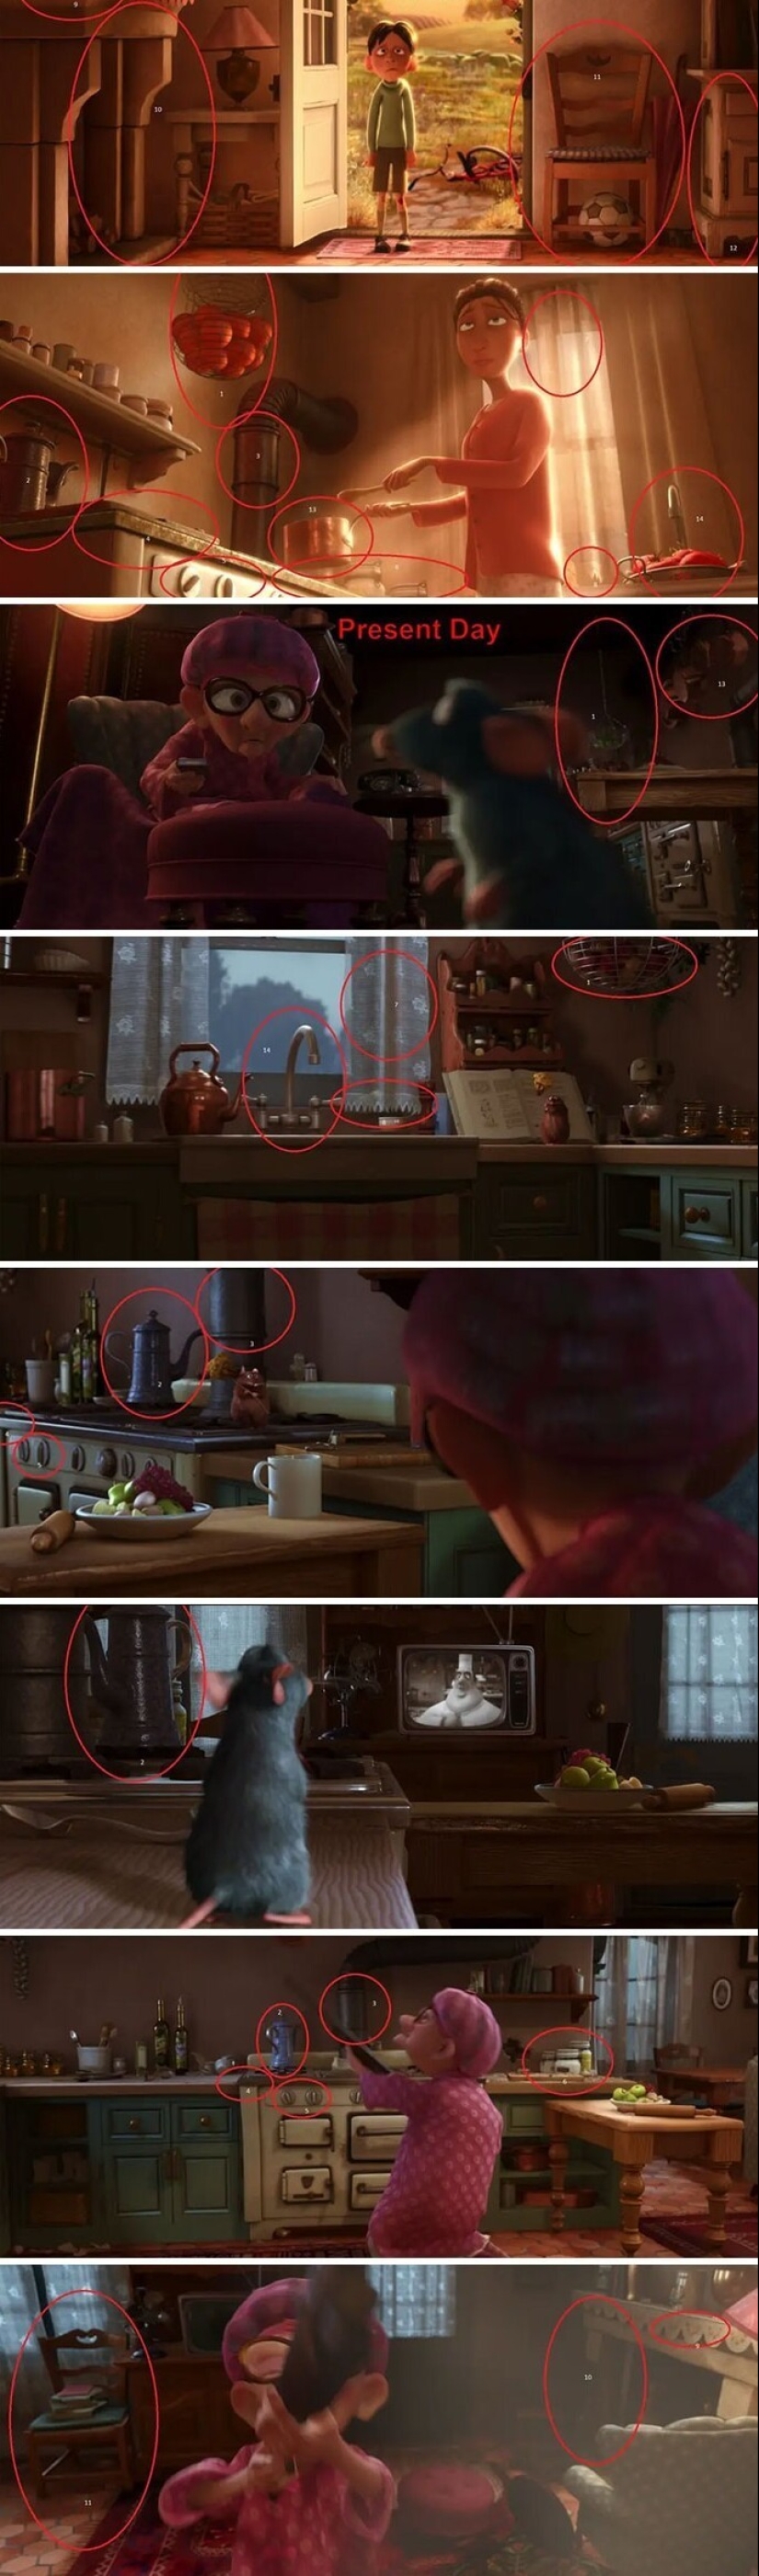 35 subtle details in the cartoon "Ratatouille" that you probably didn't notice